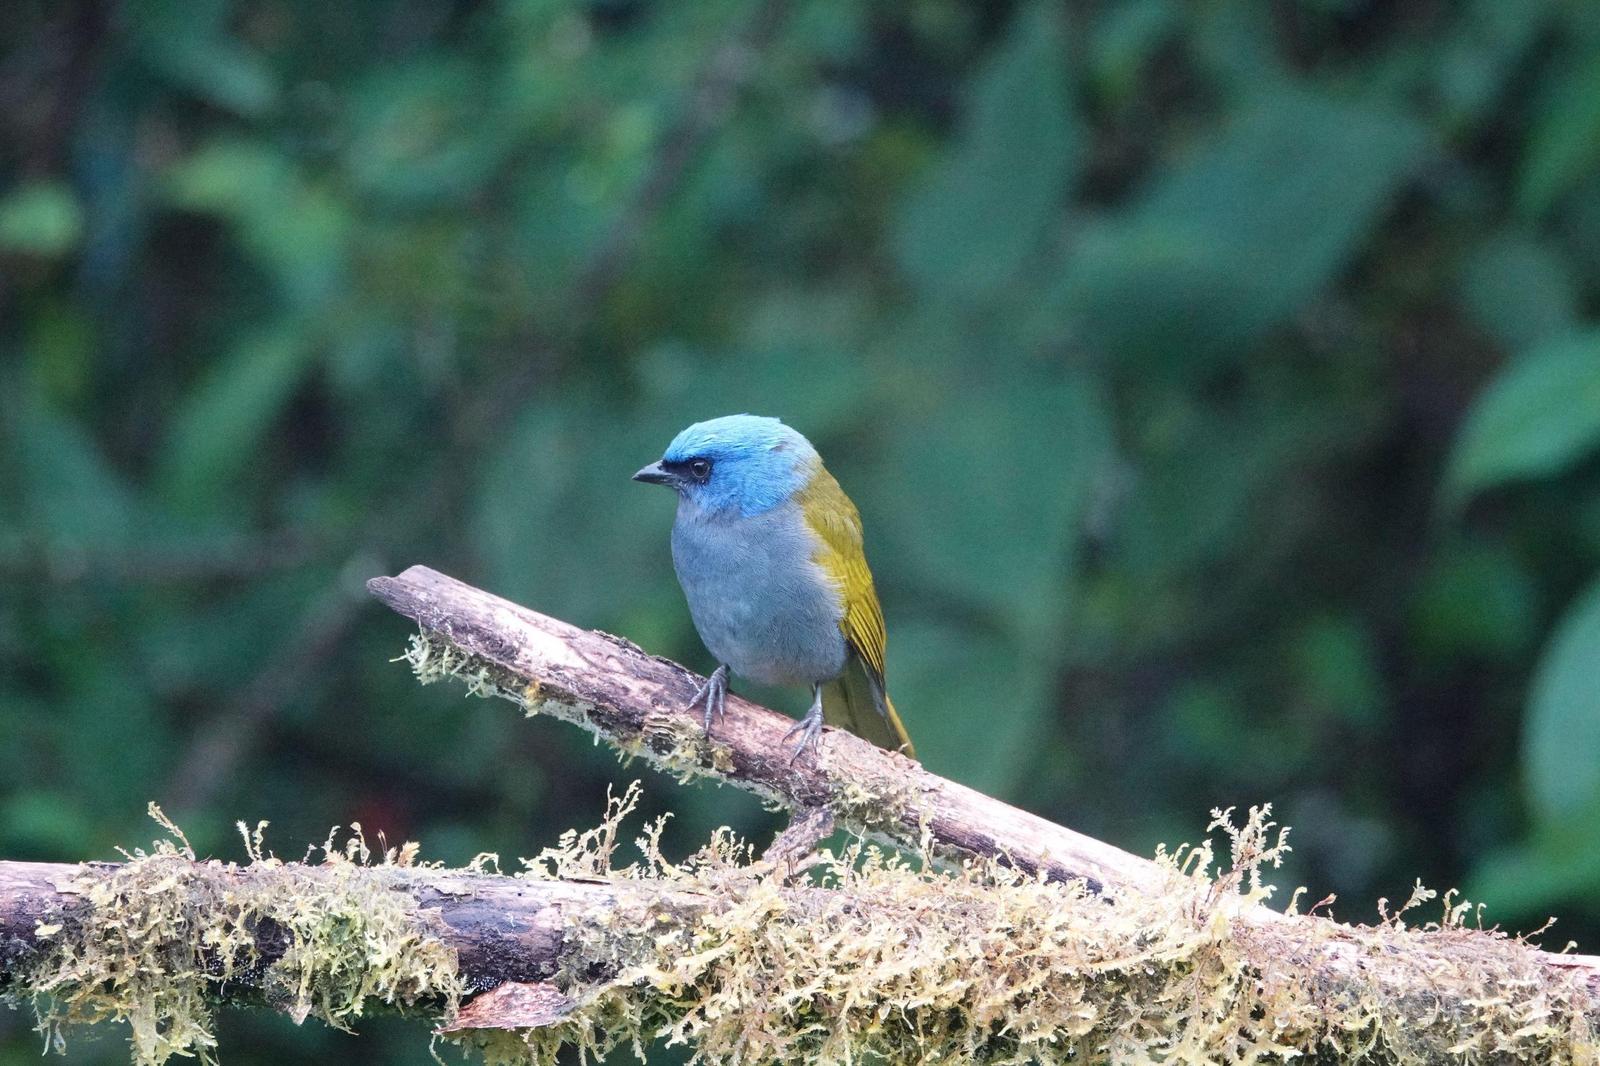 Blue-capped Tanager Photo by Bonnie Clarfield-Bylin